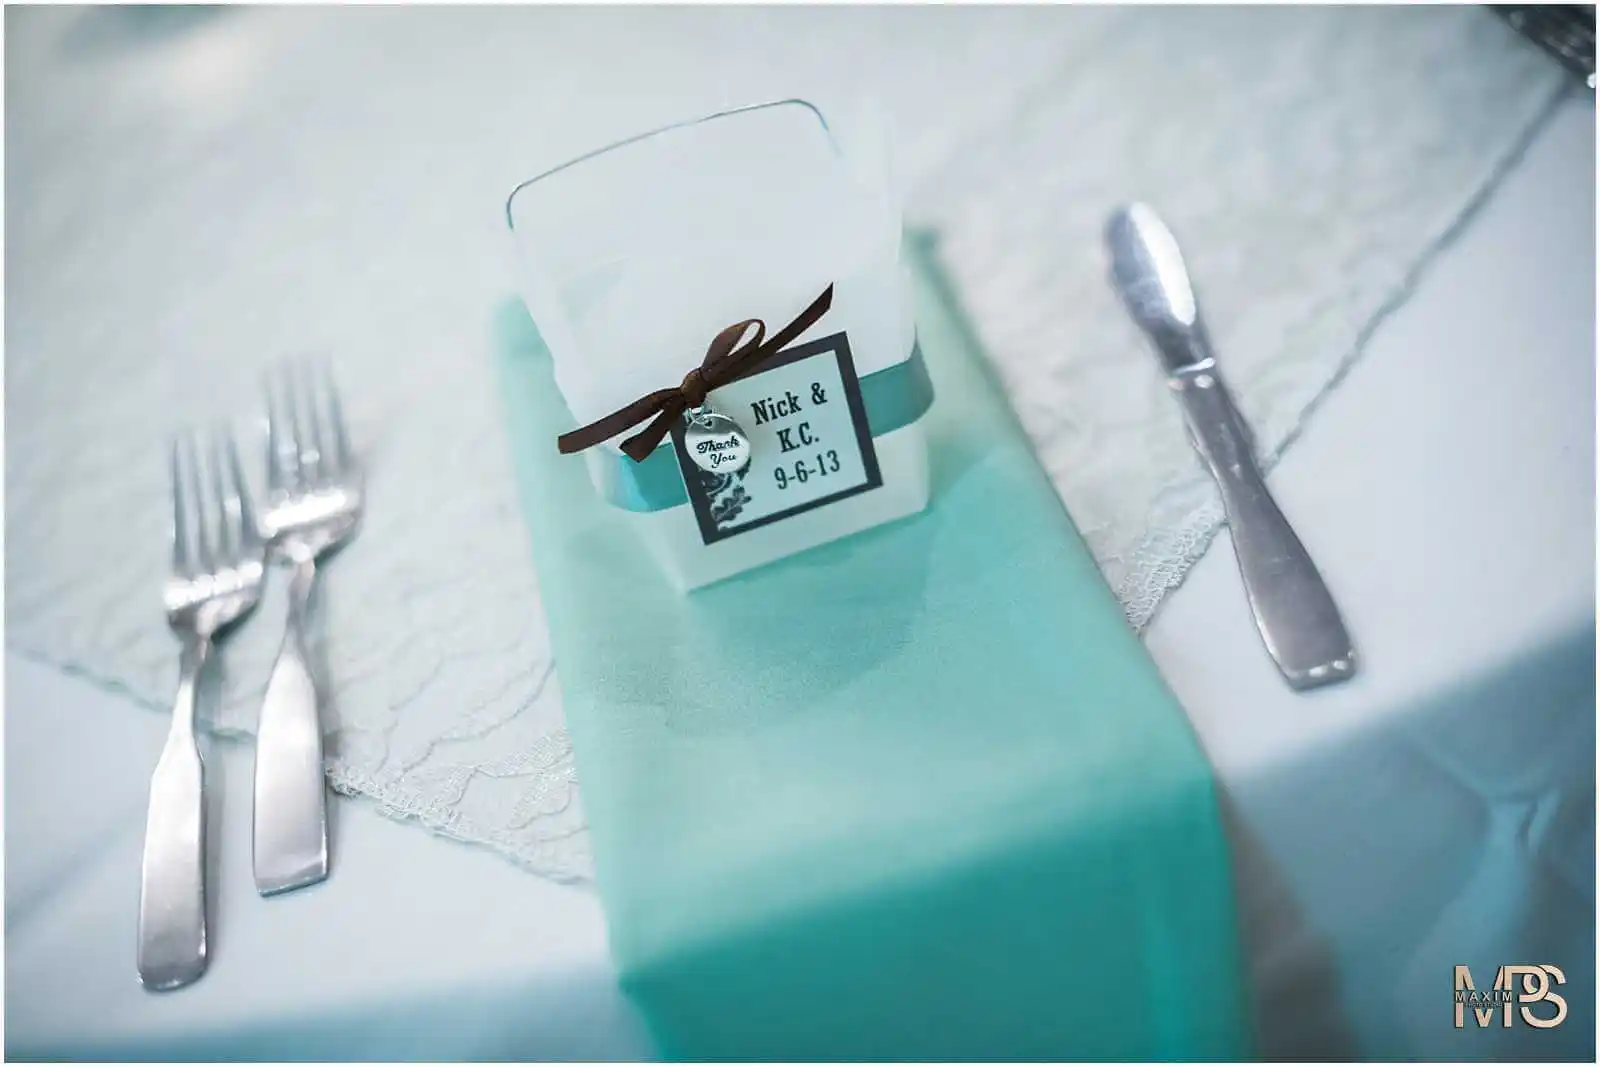 Elegant wedding table setting with personalized favor and teal accents.